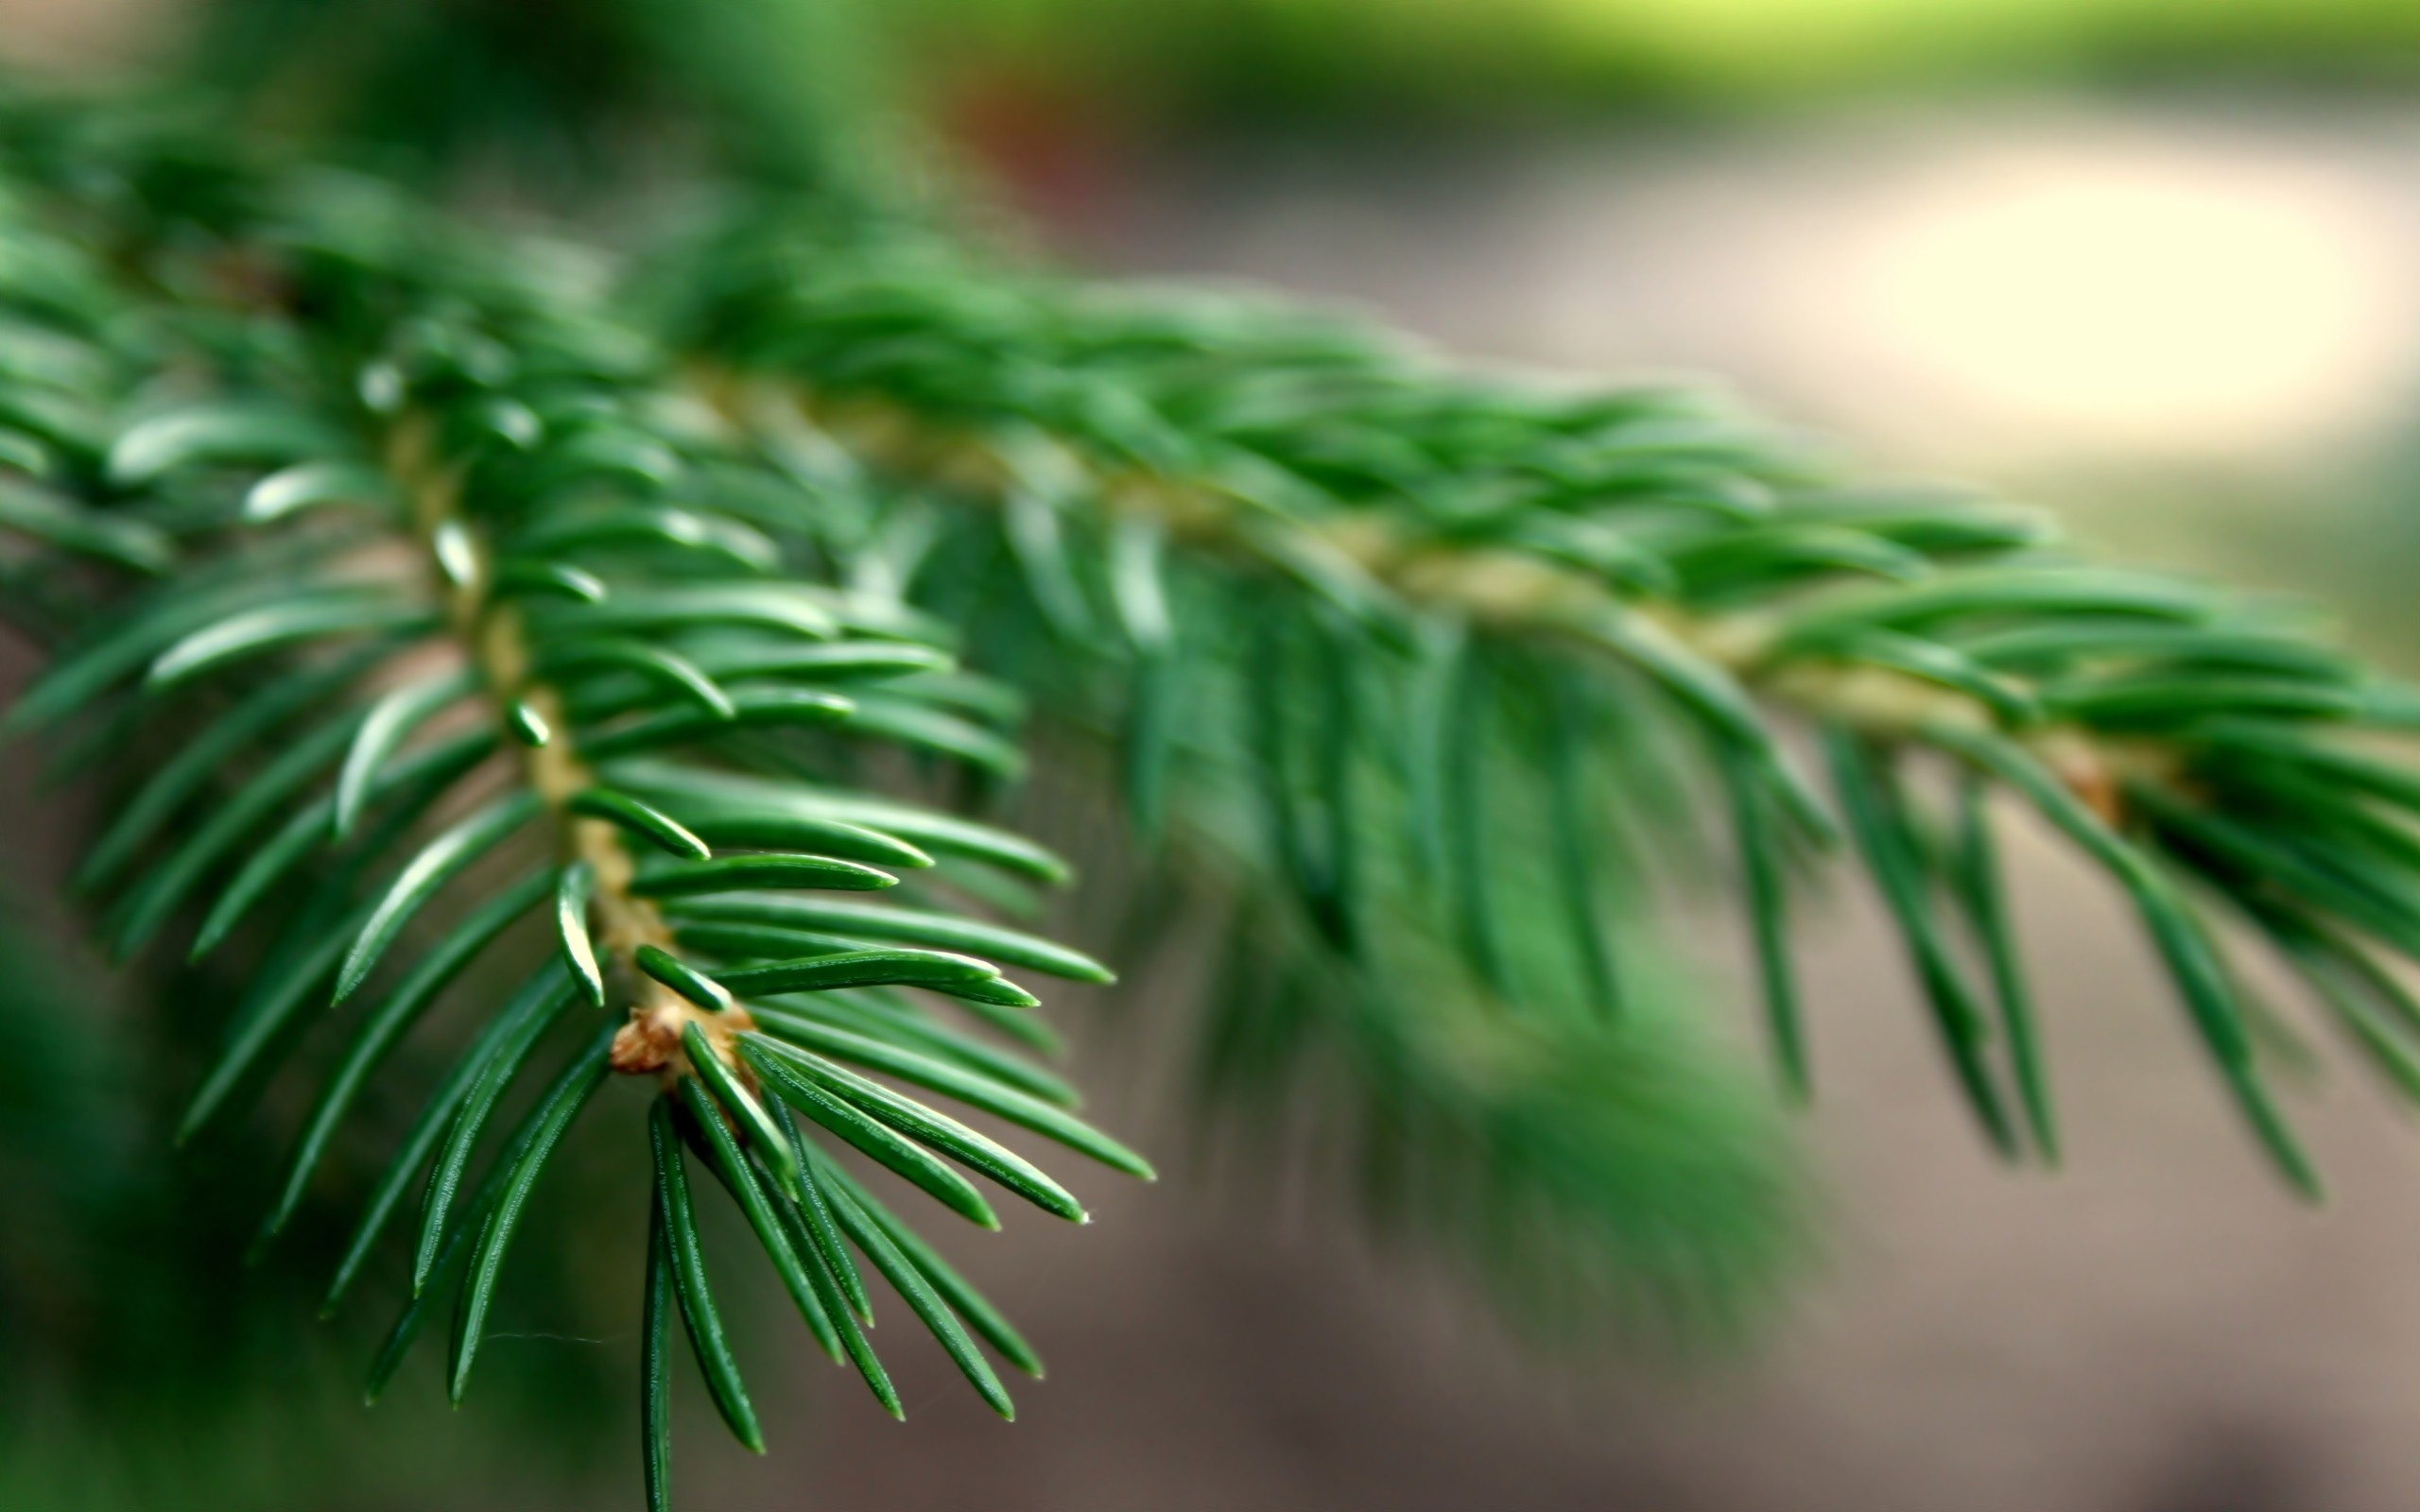 Macro view, Spruce branches, Natural textures, Lush greenery, 2560x1600 HD Desktop